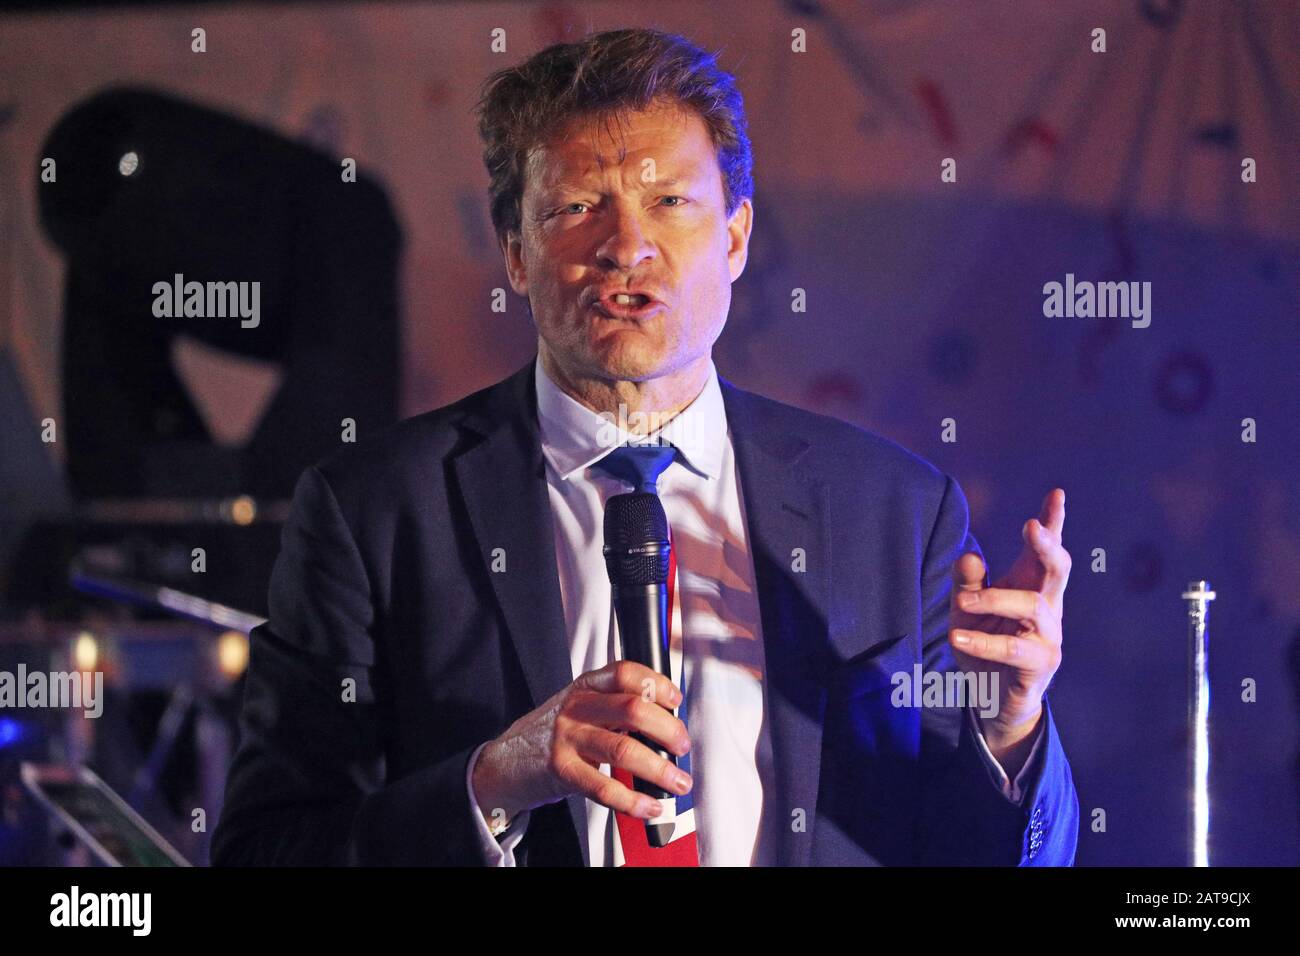 Brexit Party Chairman Richard Tice, speaks to pro-Brexit supporters in Parliament Square, London, as the UK prepares to leave the European Union, ending 47 years of close and sometimes uncomfortable ties to Brussels. Stock Photo